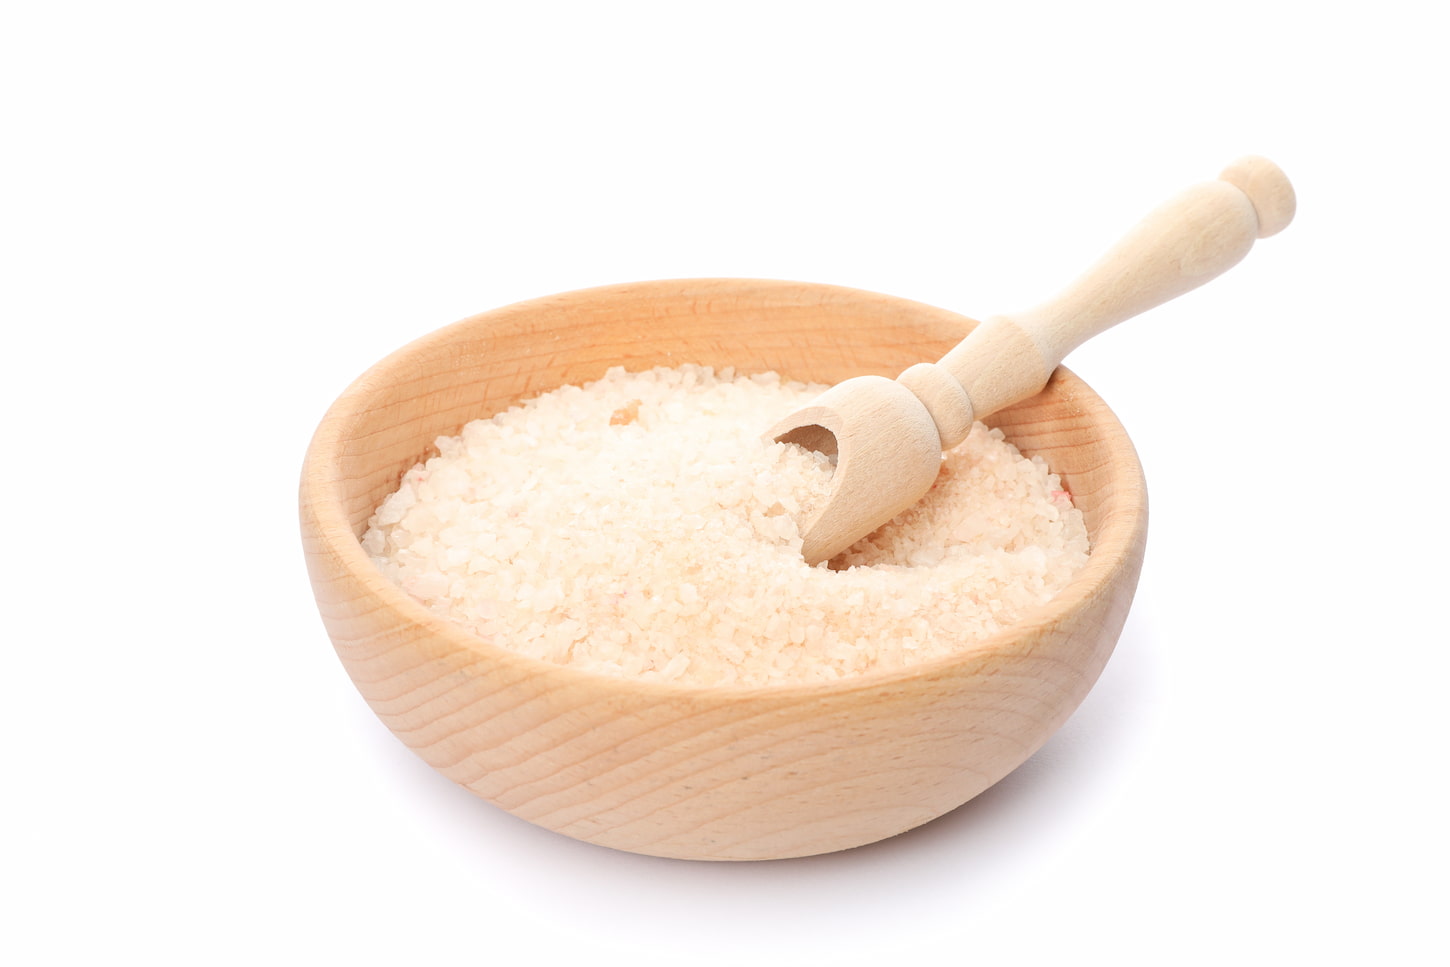 An image of a Wooden bowl with sea salt isolated on white background.